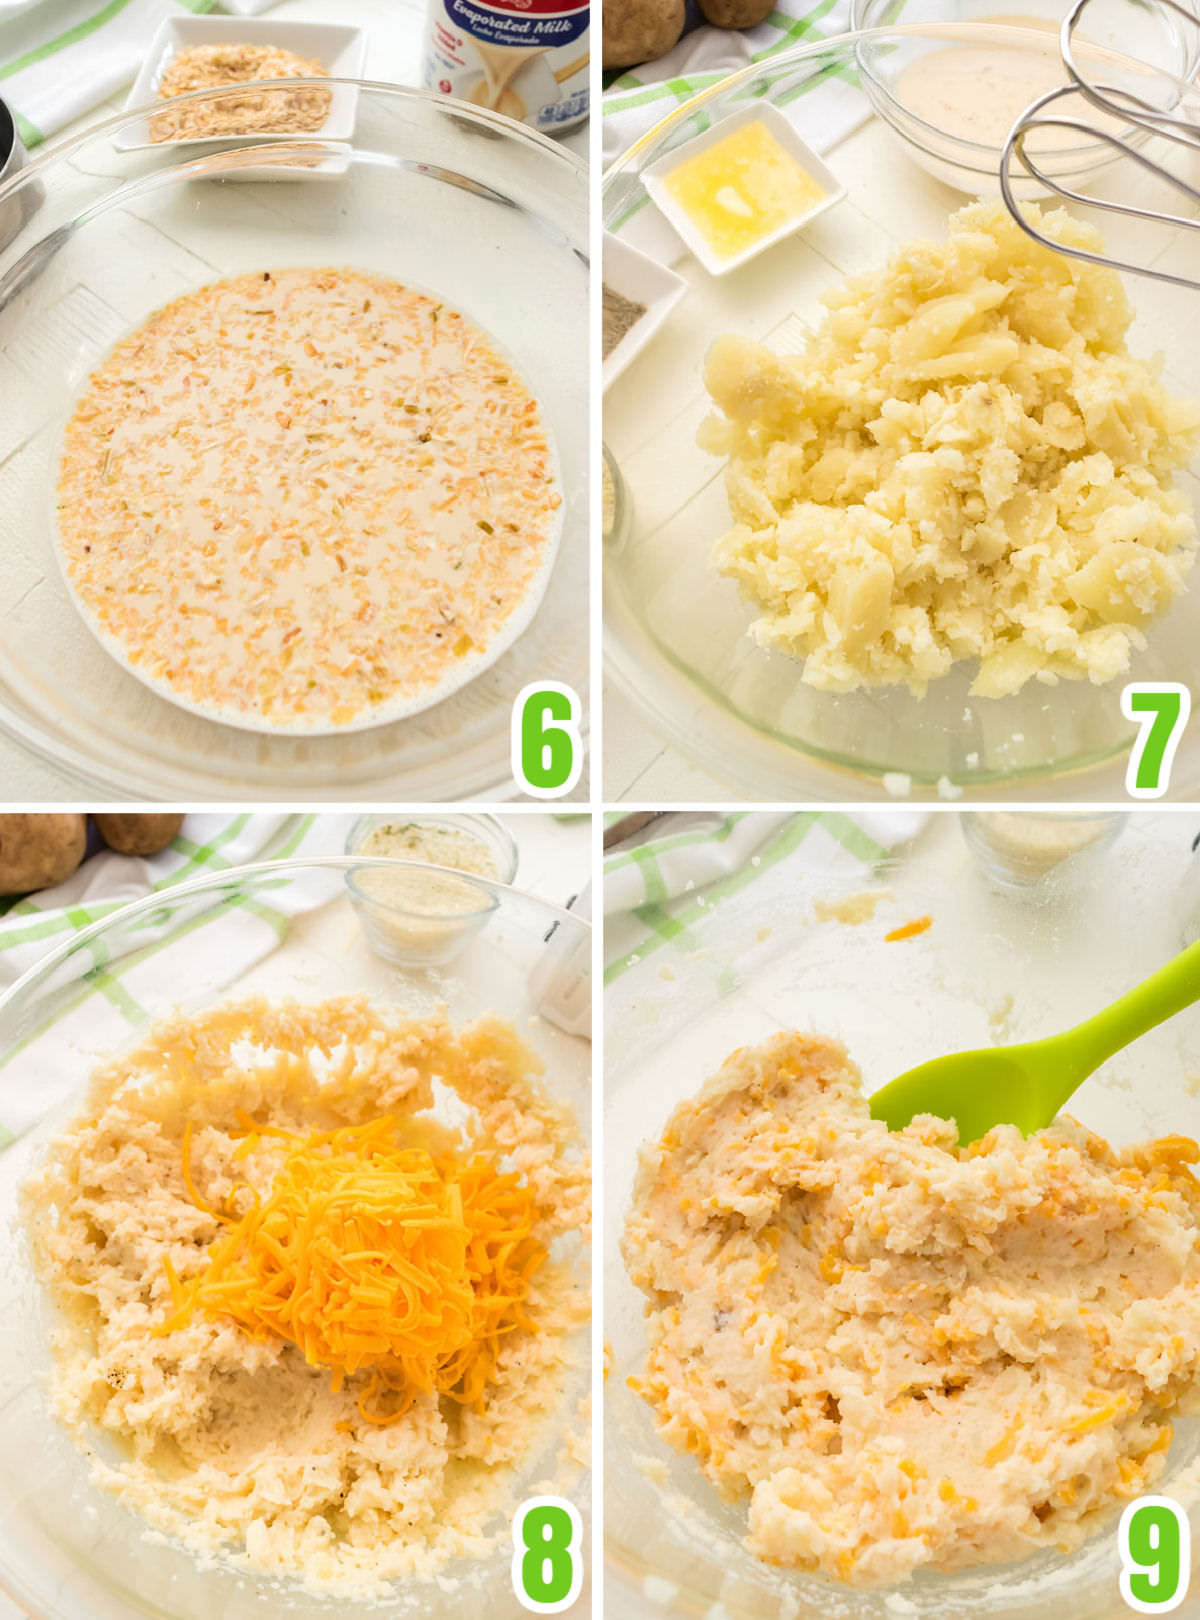 Collage image showing the steps required to make the potato filling for the Twice Baked Potatoes.